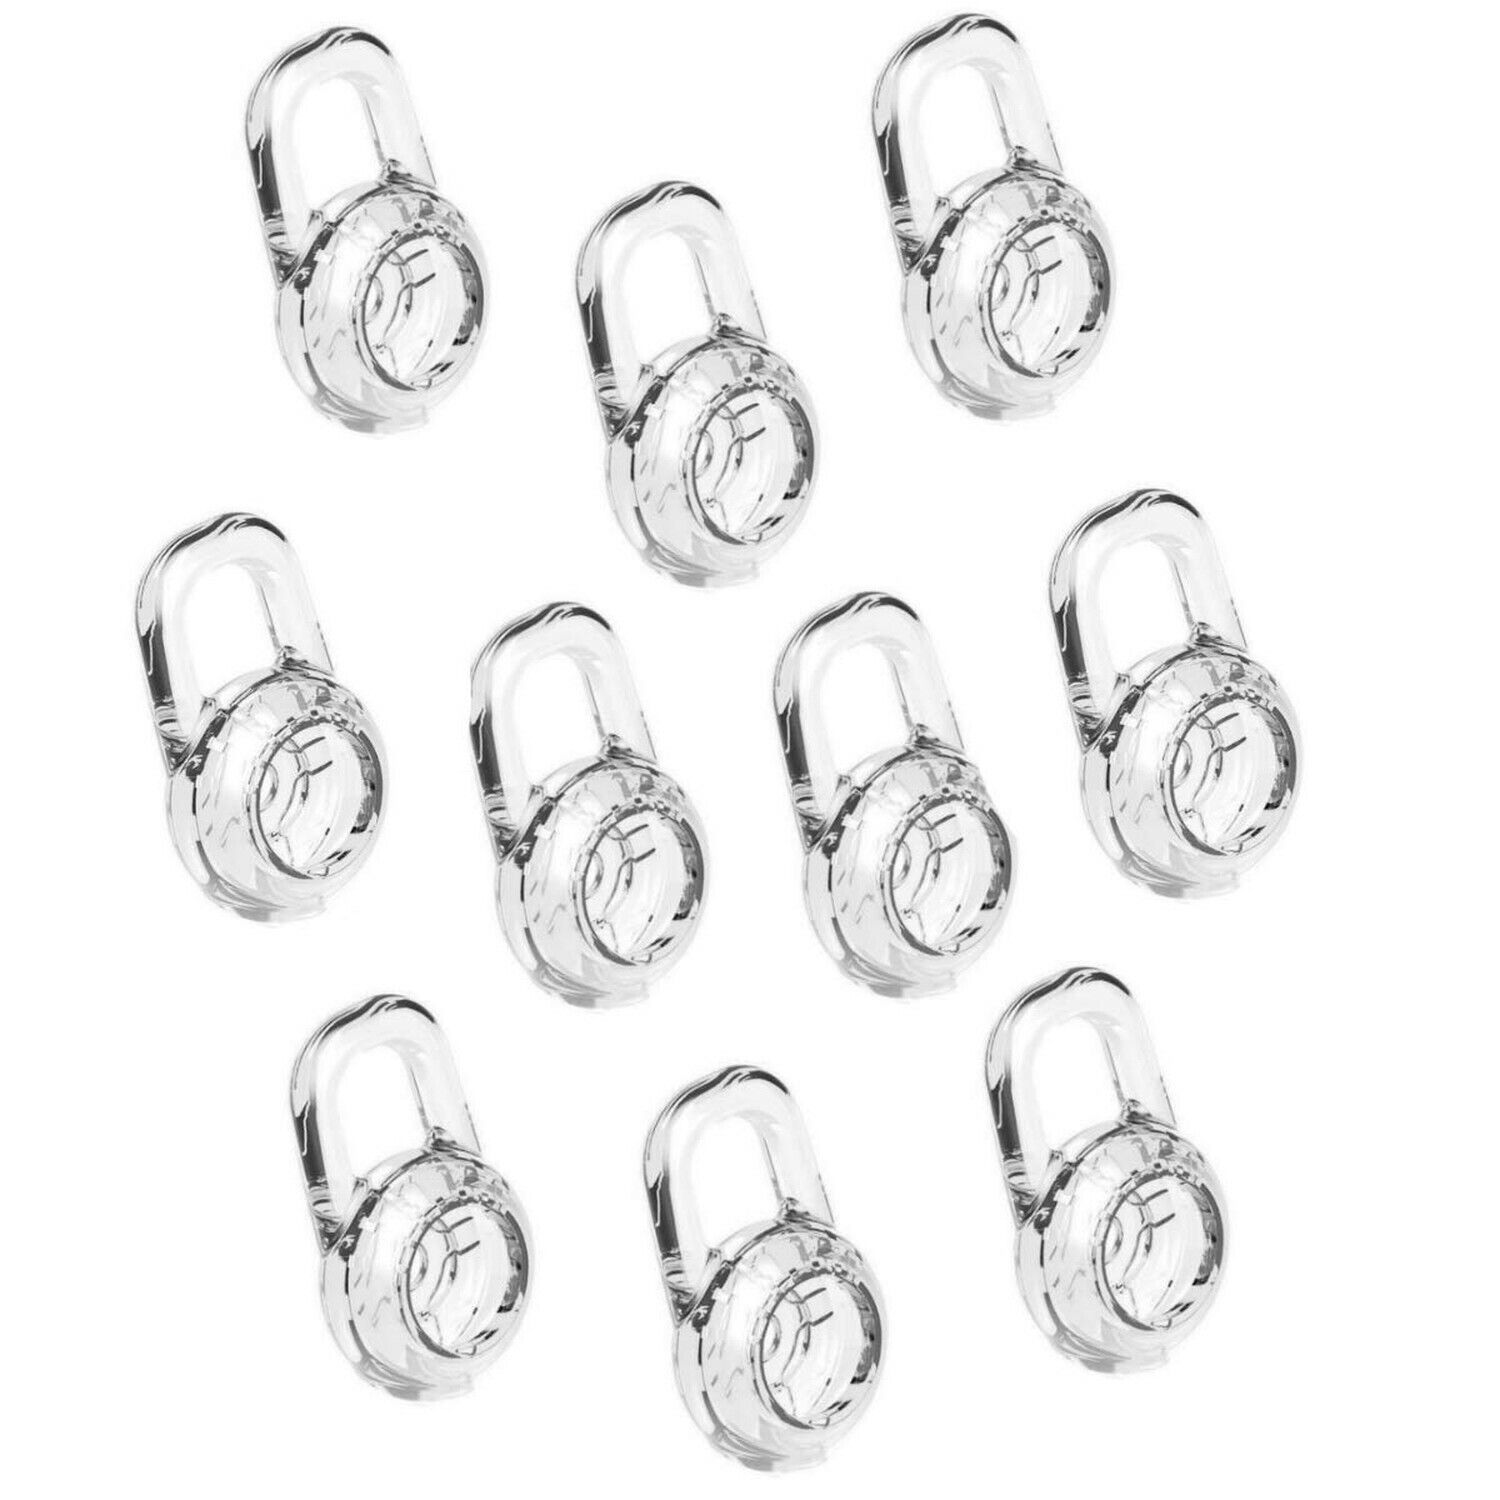 Earbud Gels for Plantronics Headset 10PCS Clear Replacement Gels - Small Size